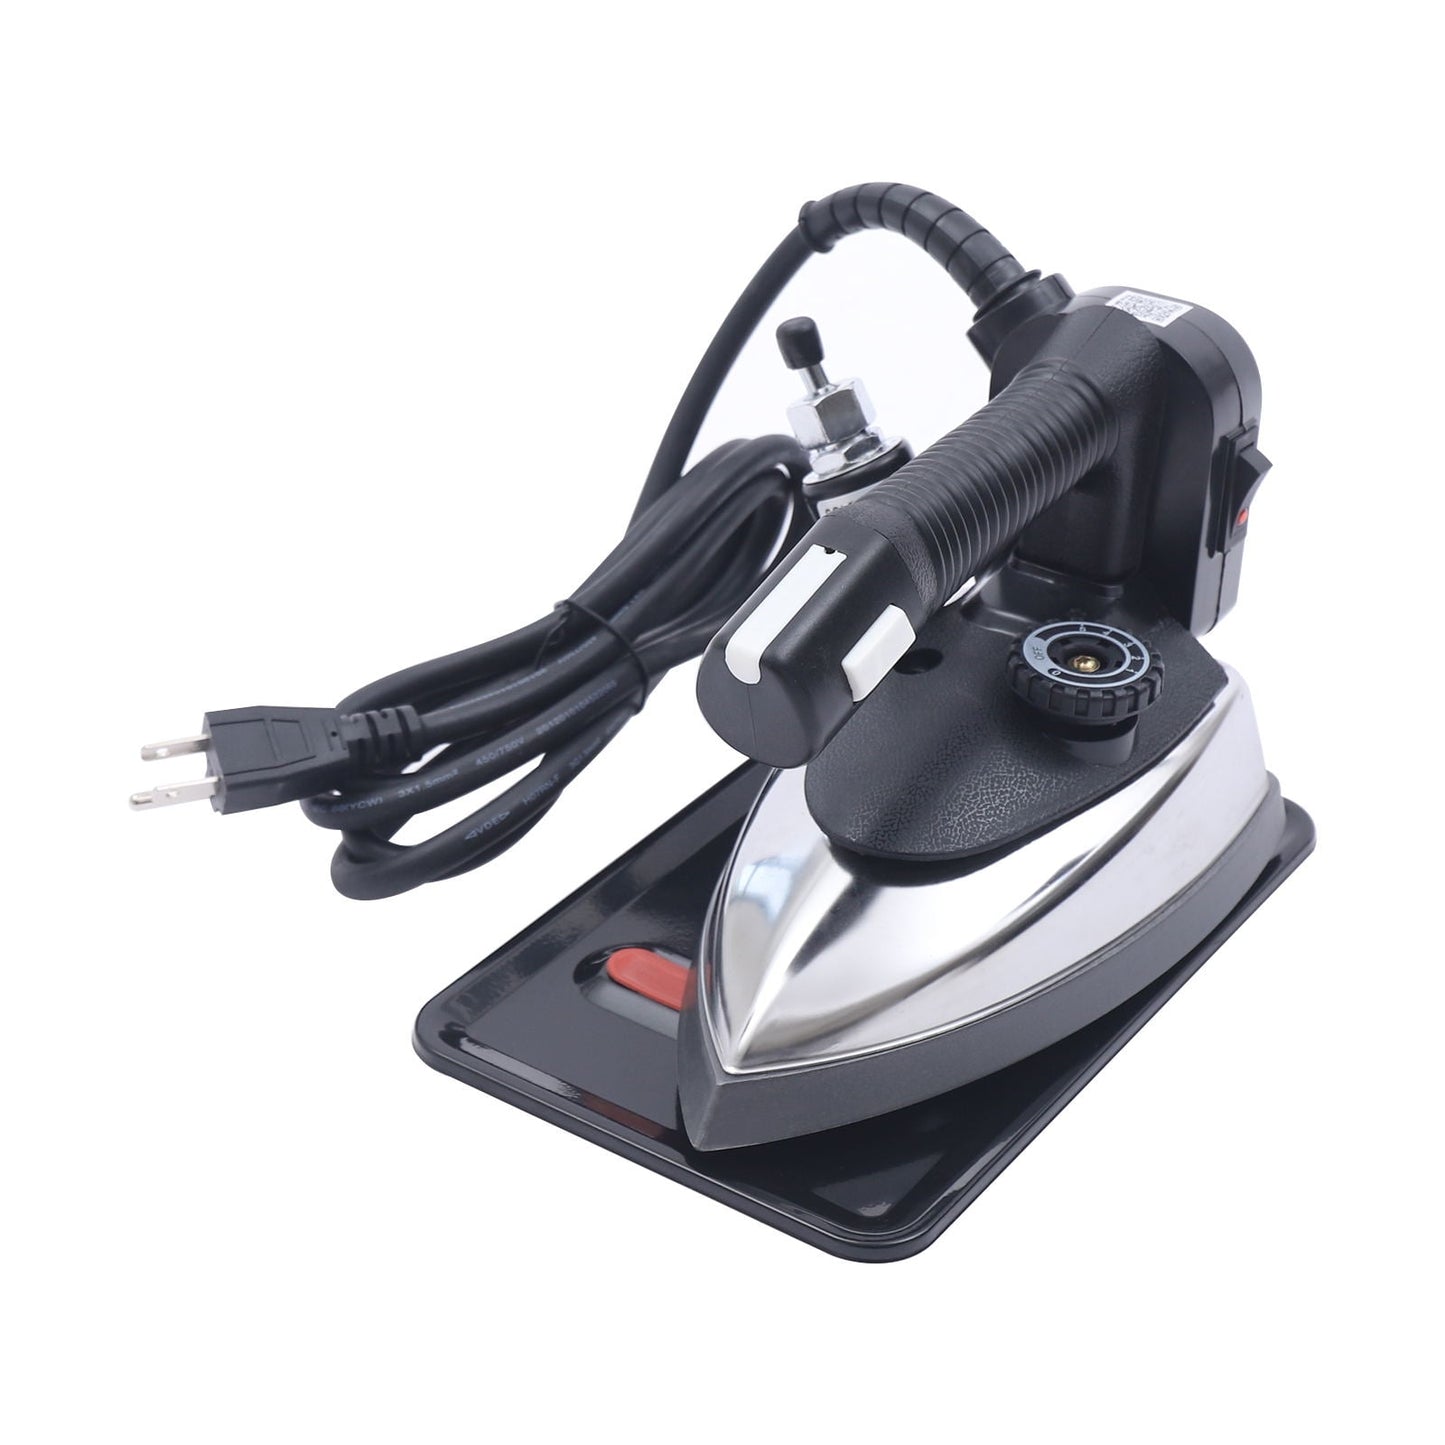 Wuzstar Industrial Electric Steam Iron Gravity-system Electric Steam Iron 3L Water Bottle 1KW